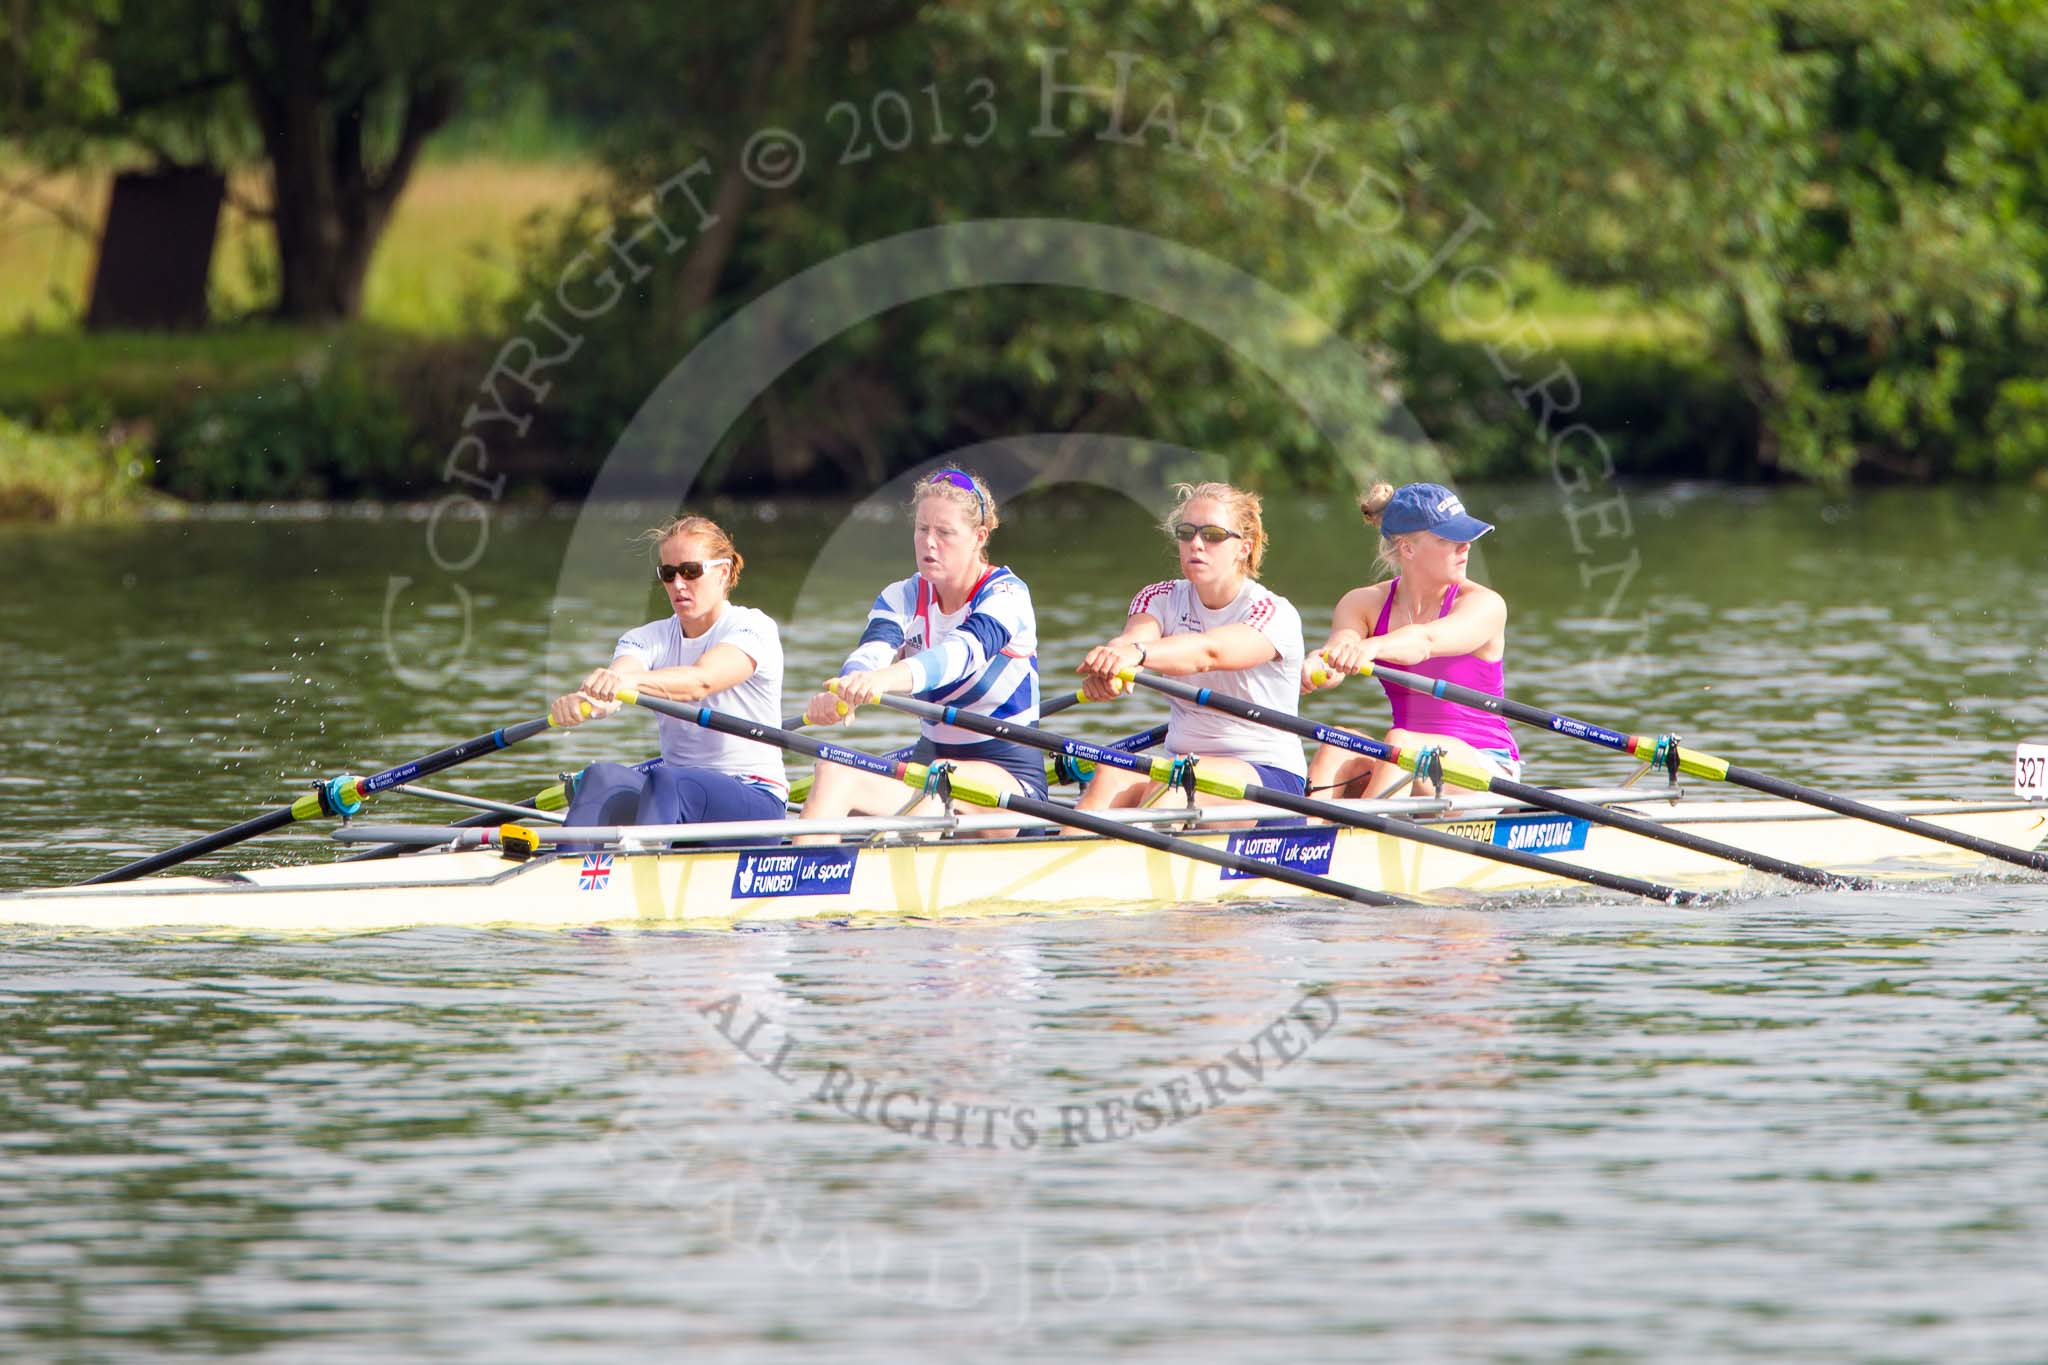 Henley Royal Regatta 2013, Saturday: The Leander Club and Minerva Bath Rowing Club coxless four during a training session in the morning. Image #18, 06 July 2013 08:47 River Thames, Henley on Thames, UK